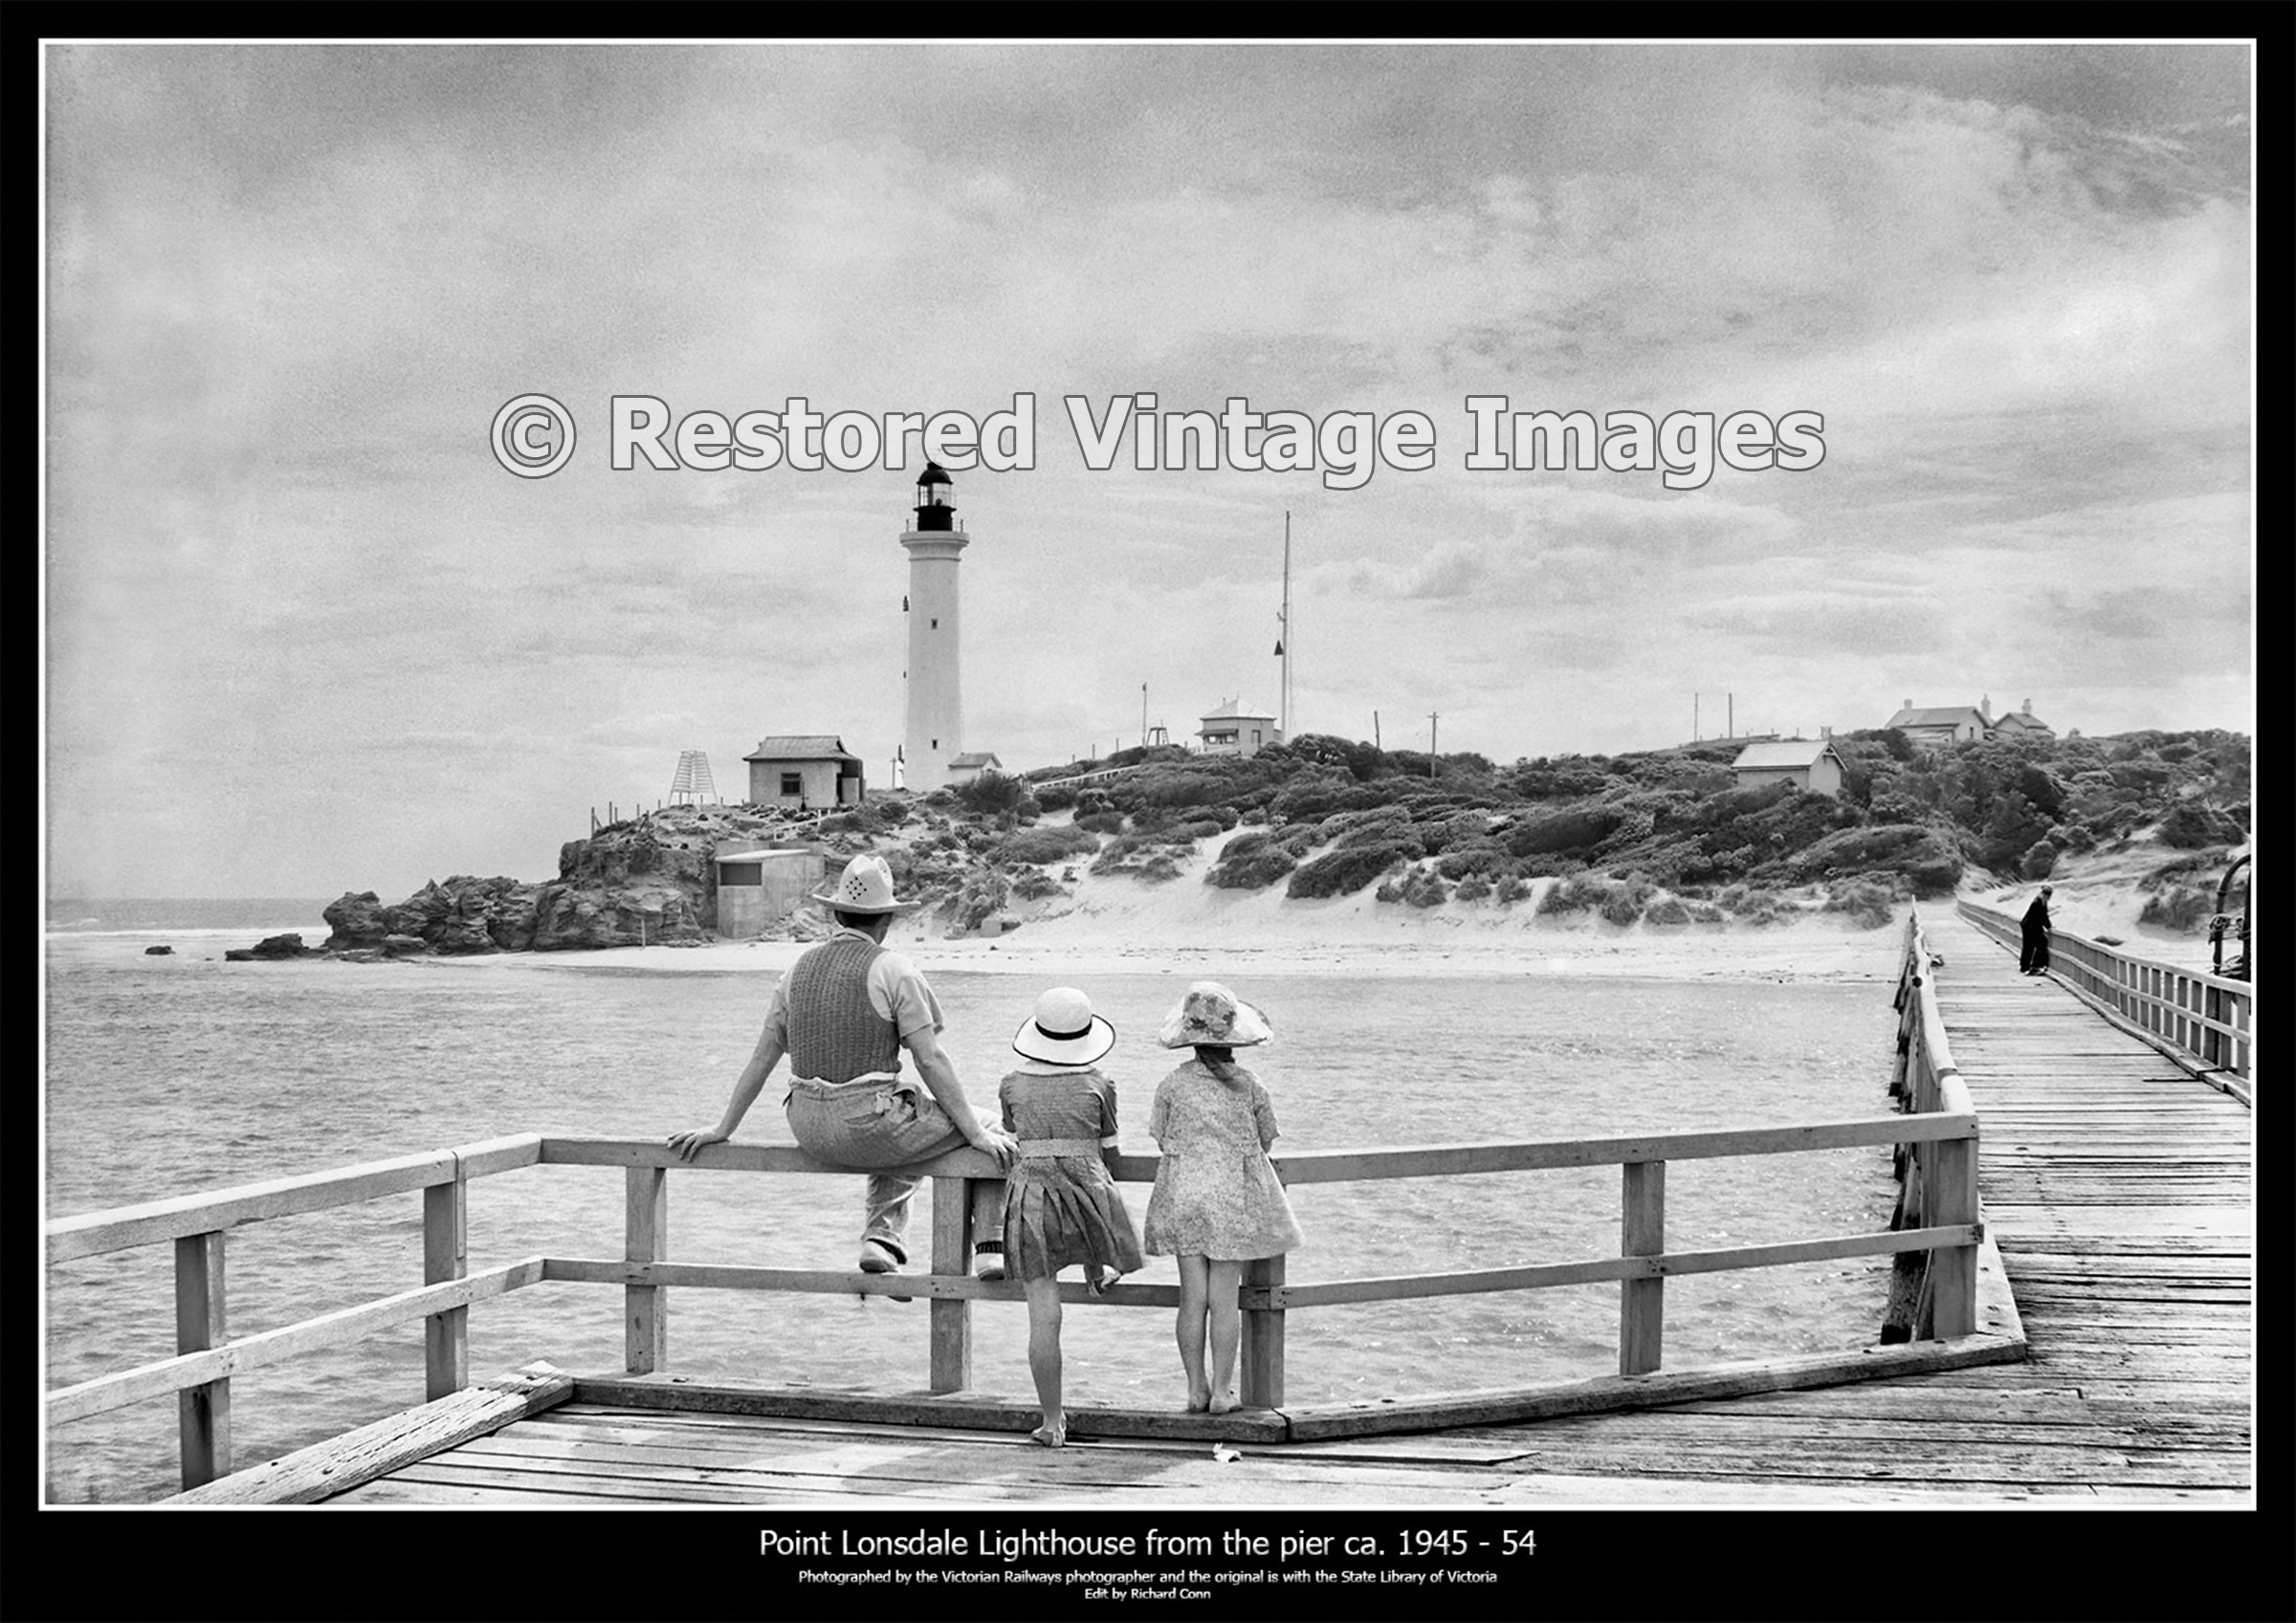 Point Lonsdale Lighthouse From Pier 1945 – 54